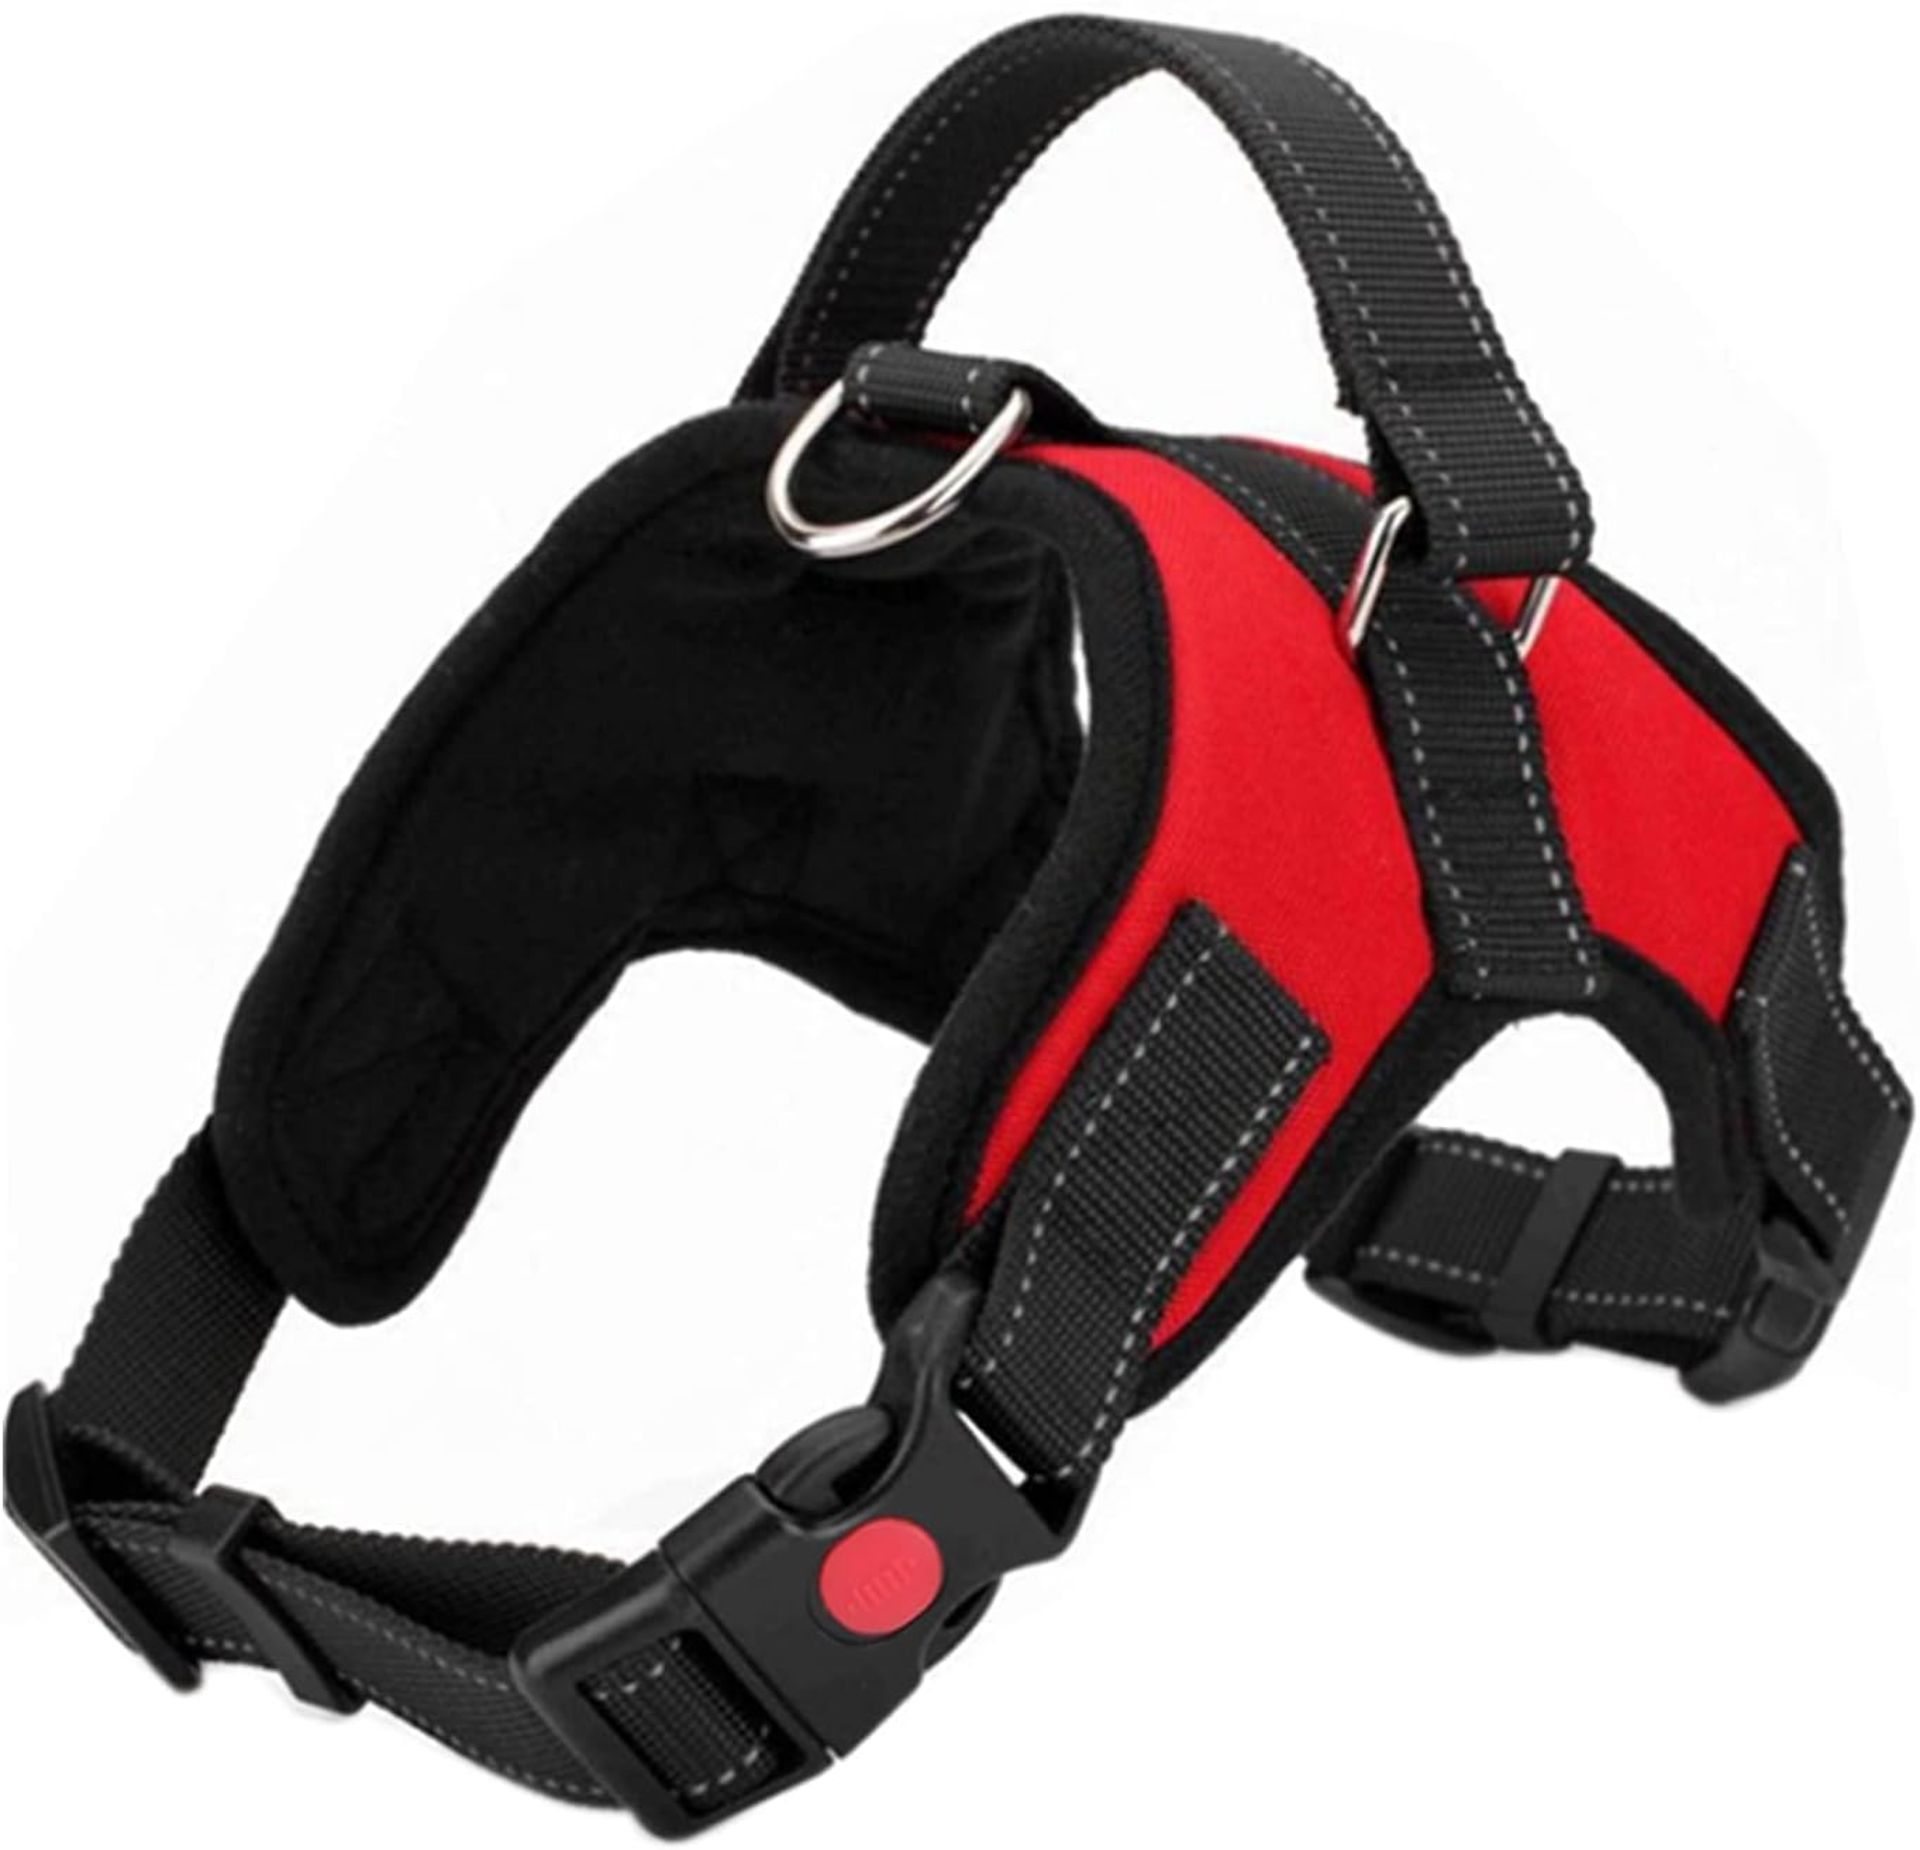 300 X JOBLOT DOG HARNESSES STRONG MIXED SIZES AND COLORS - Image 6 of 7